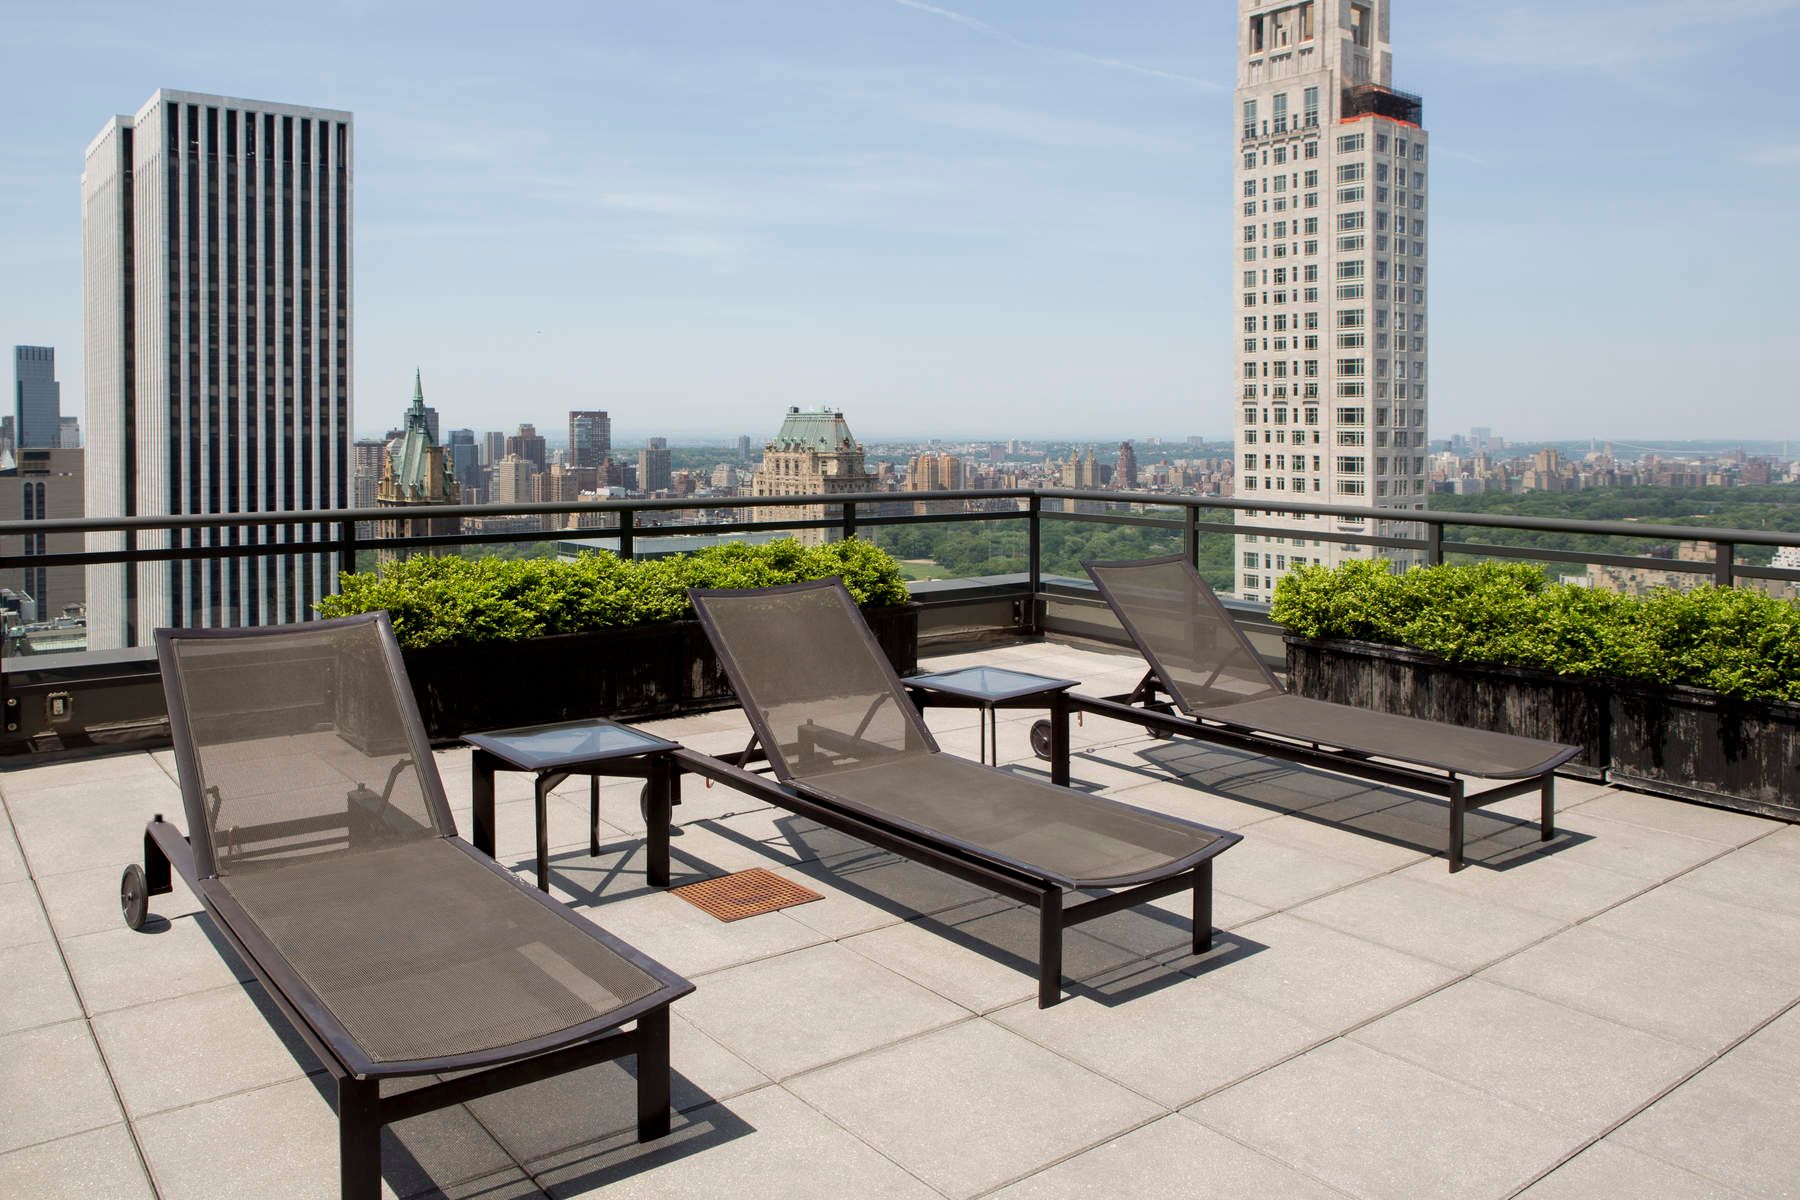 Martine Capdevielle_Luxury Real Estate NYC_117 EAST 57TH STREET APT 34h7.jpg